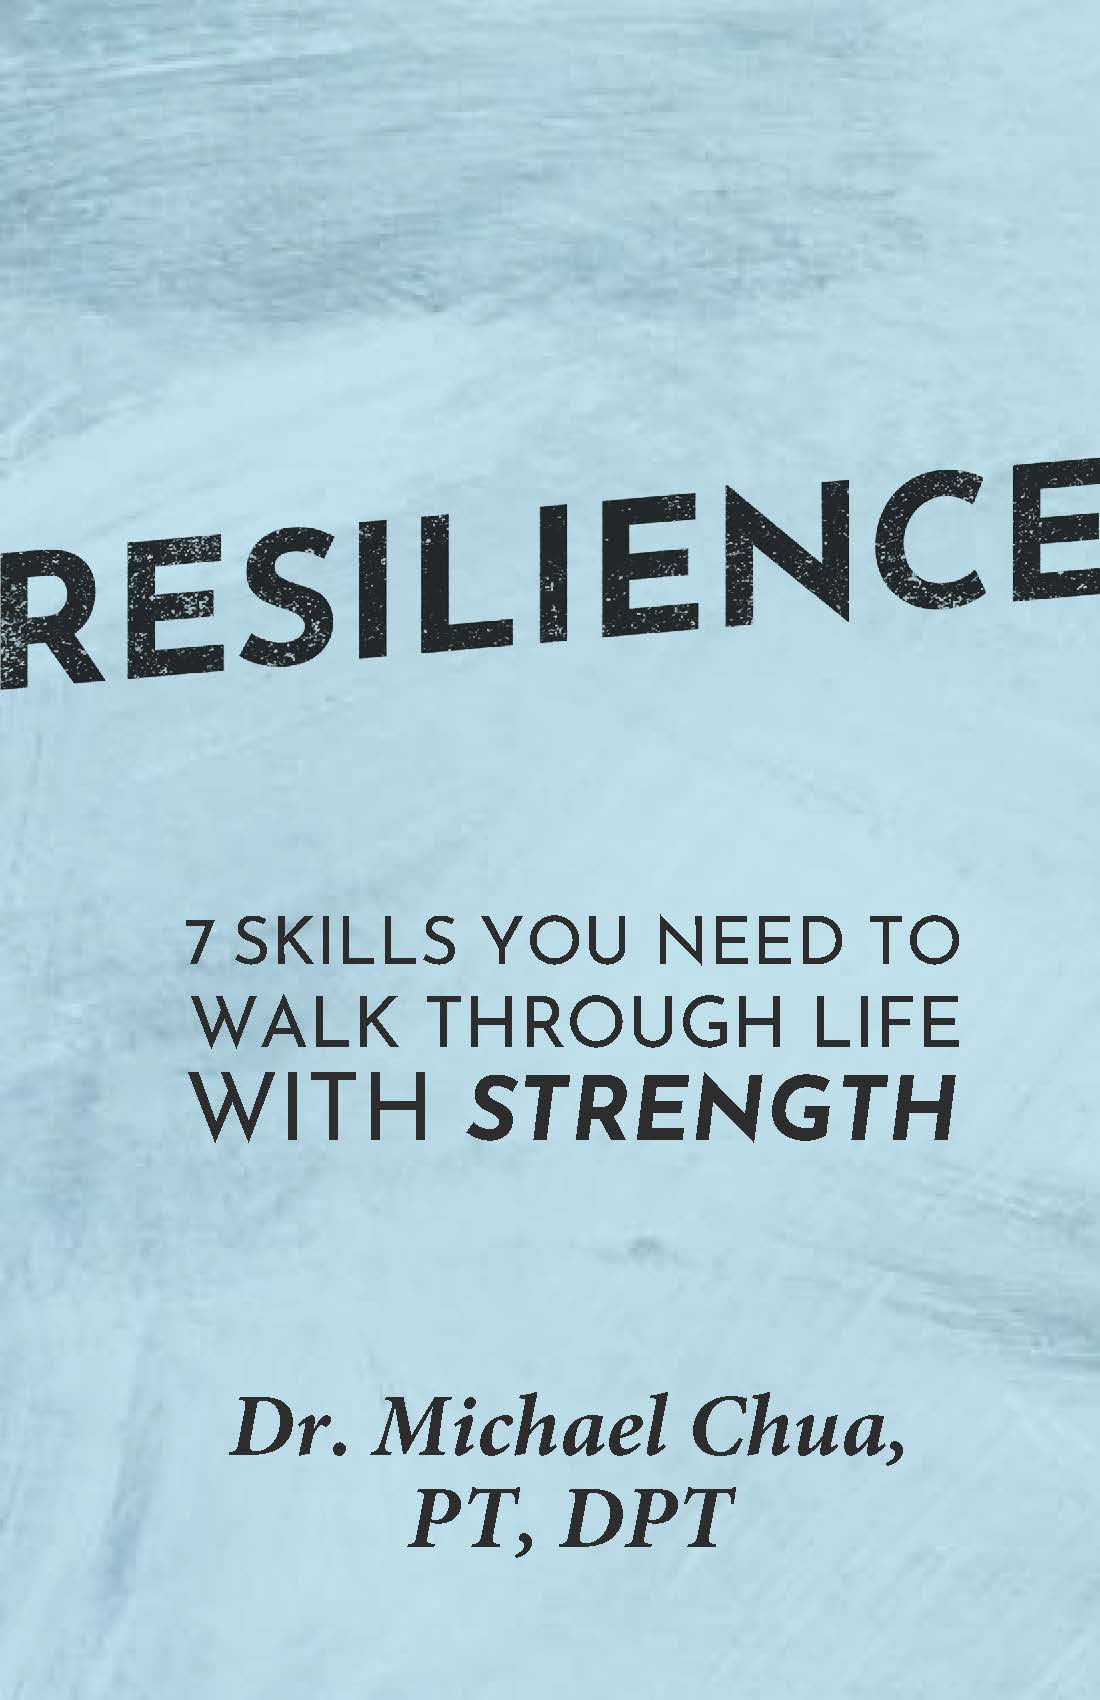 Pages from Resilience - 7 Skills You Need To Walk Through Life With Strength